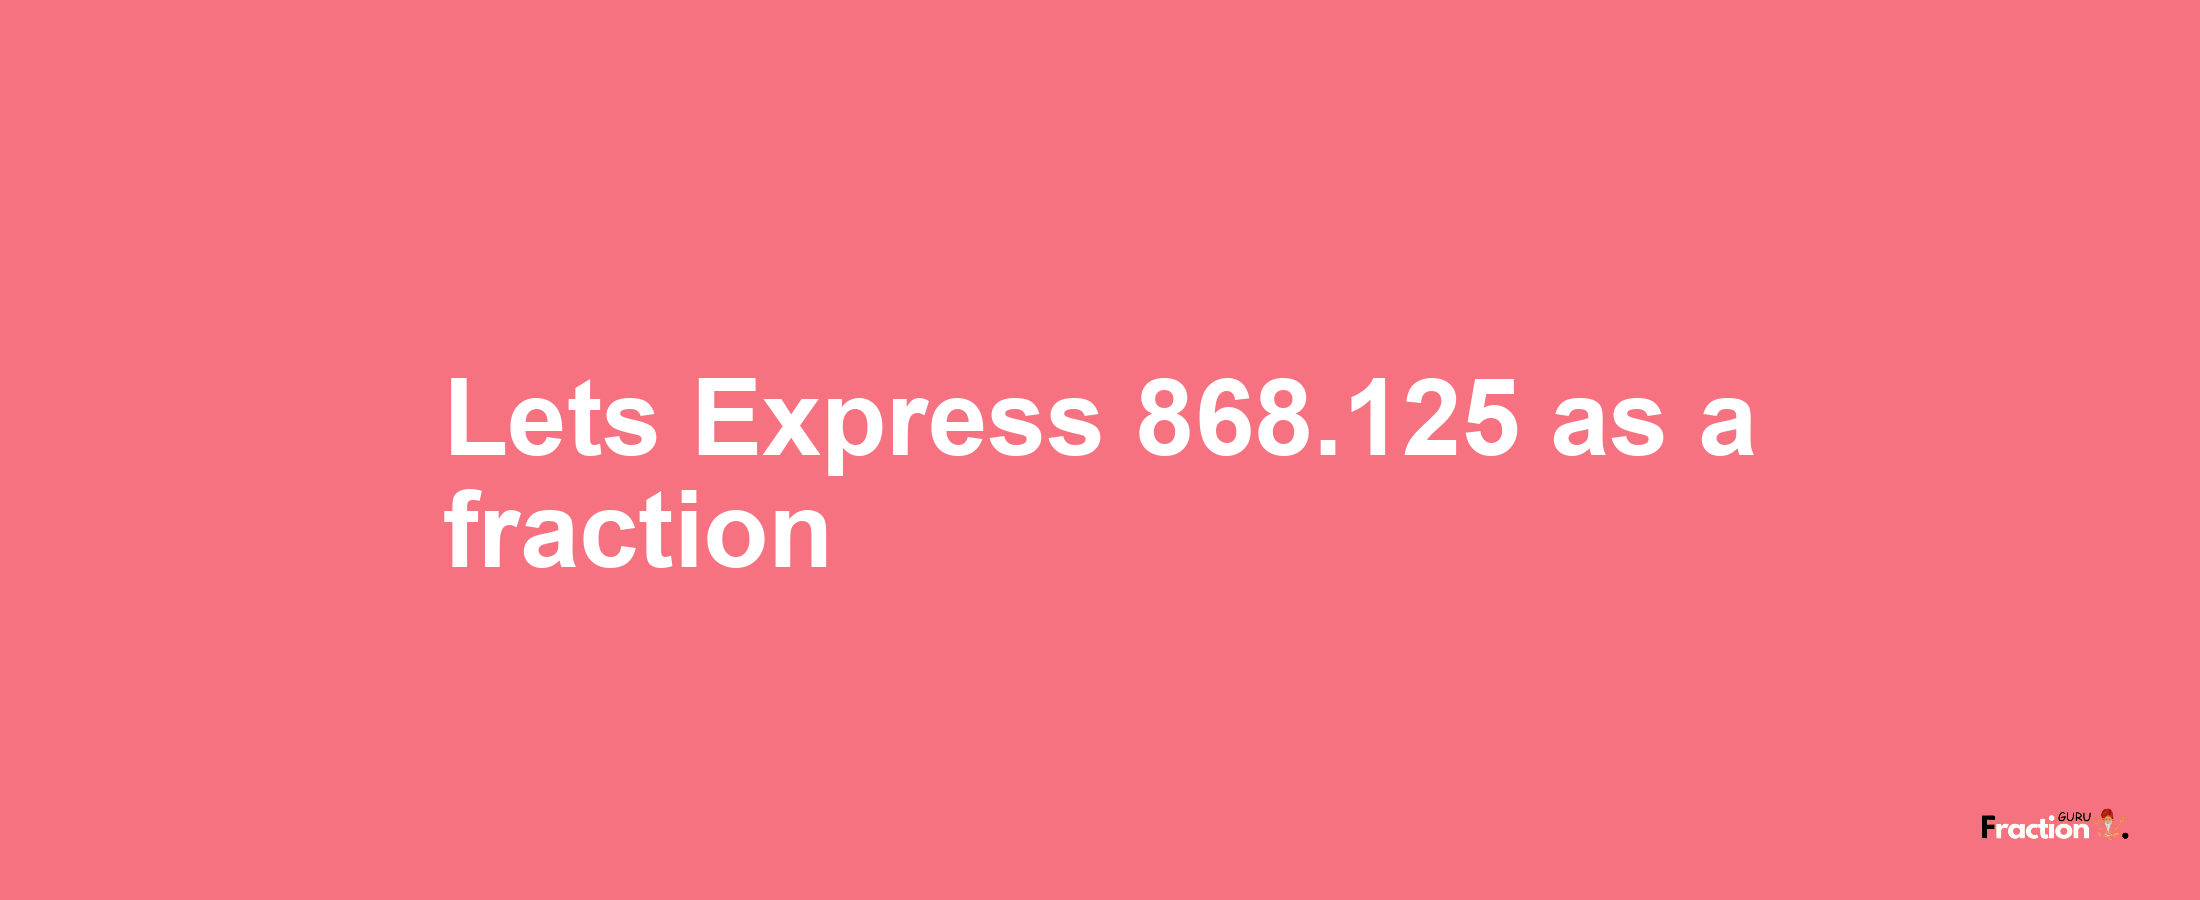 Lets Express 868.125 as afraction